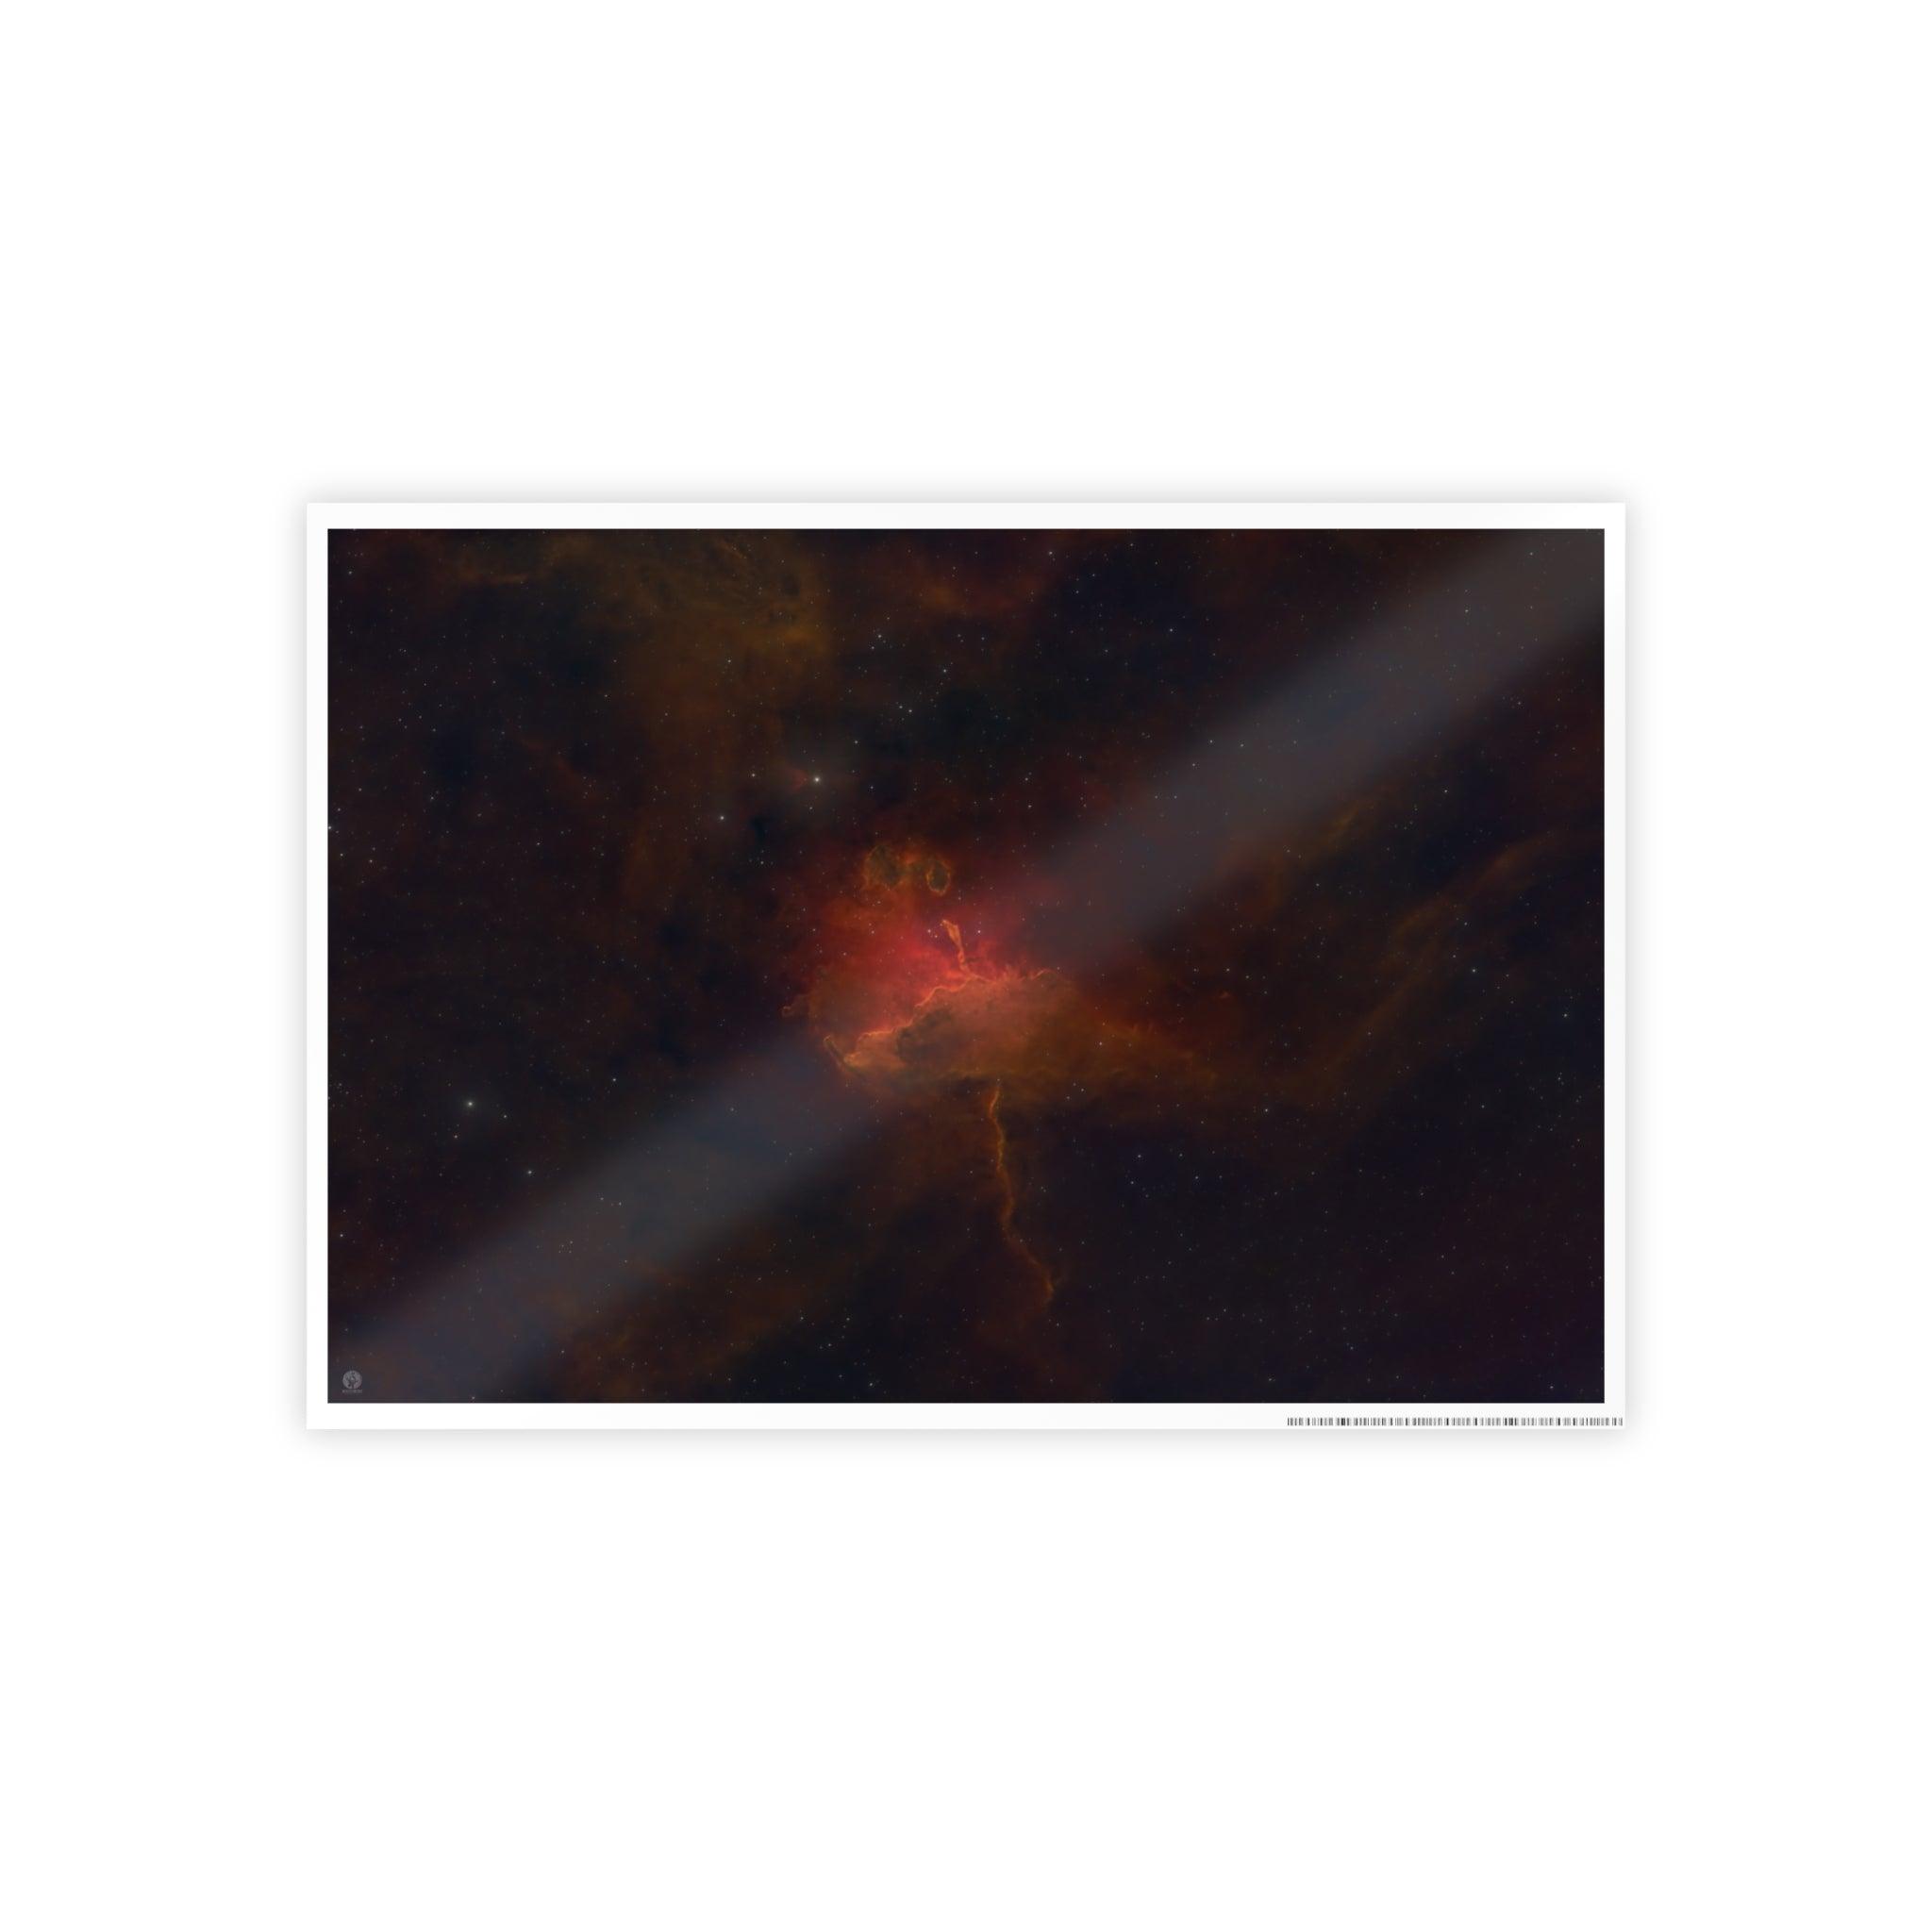 Poster of the Spider Nebula (SH2-234)